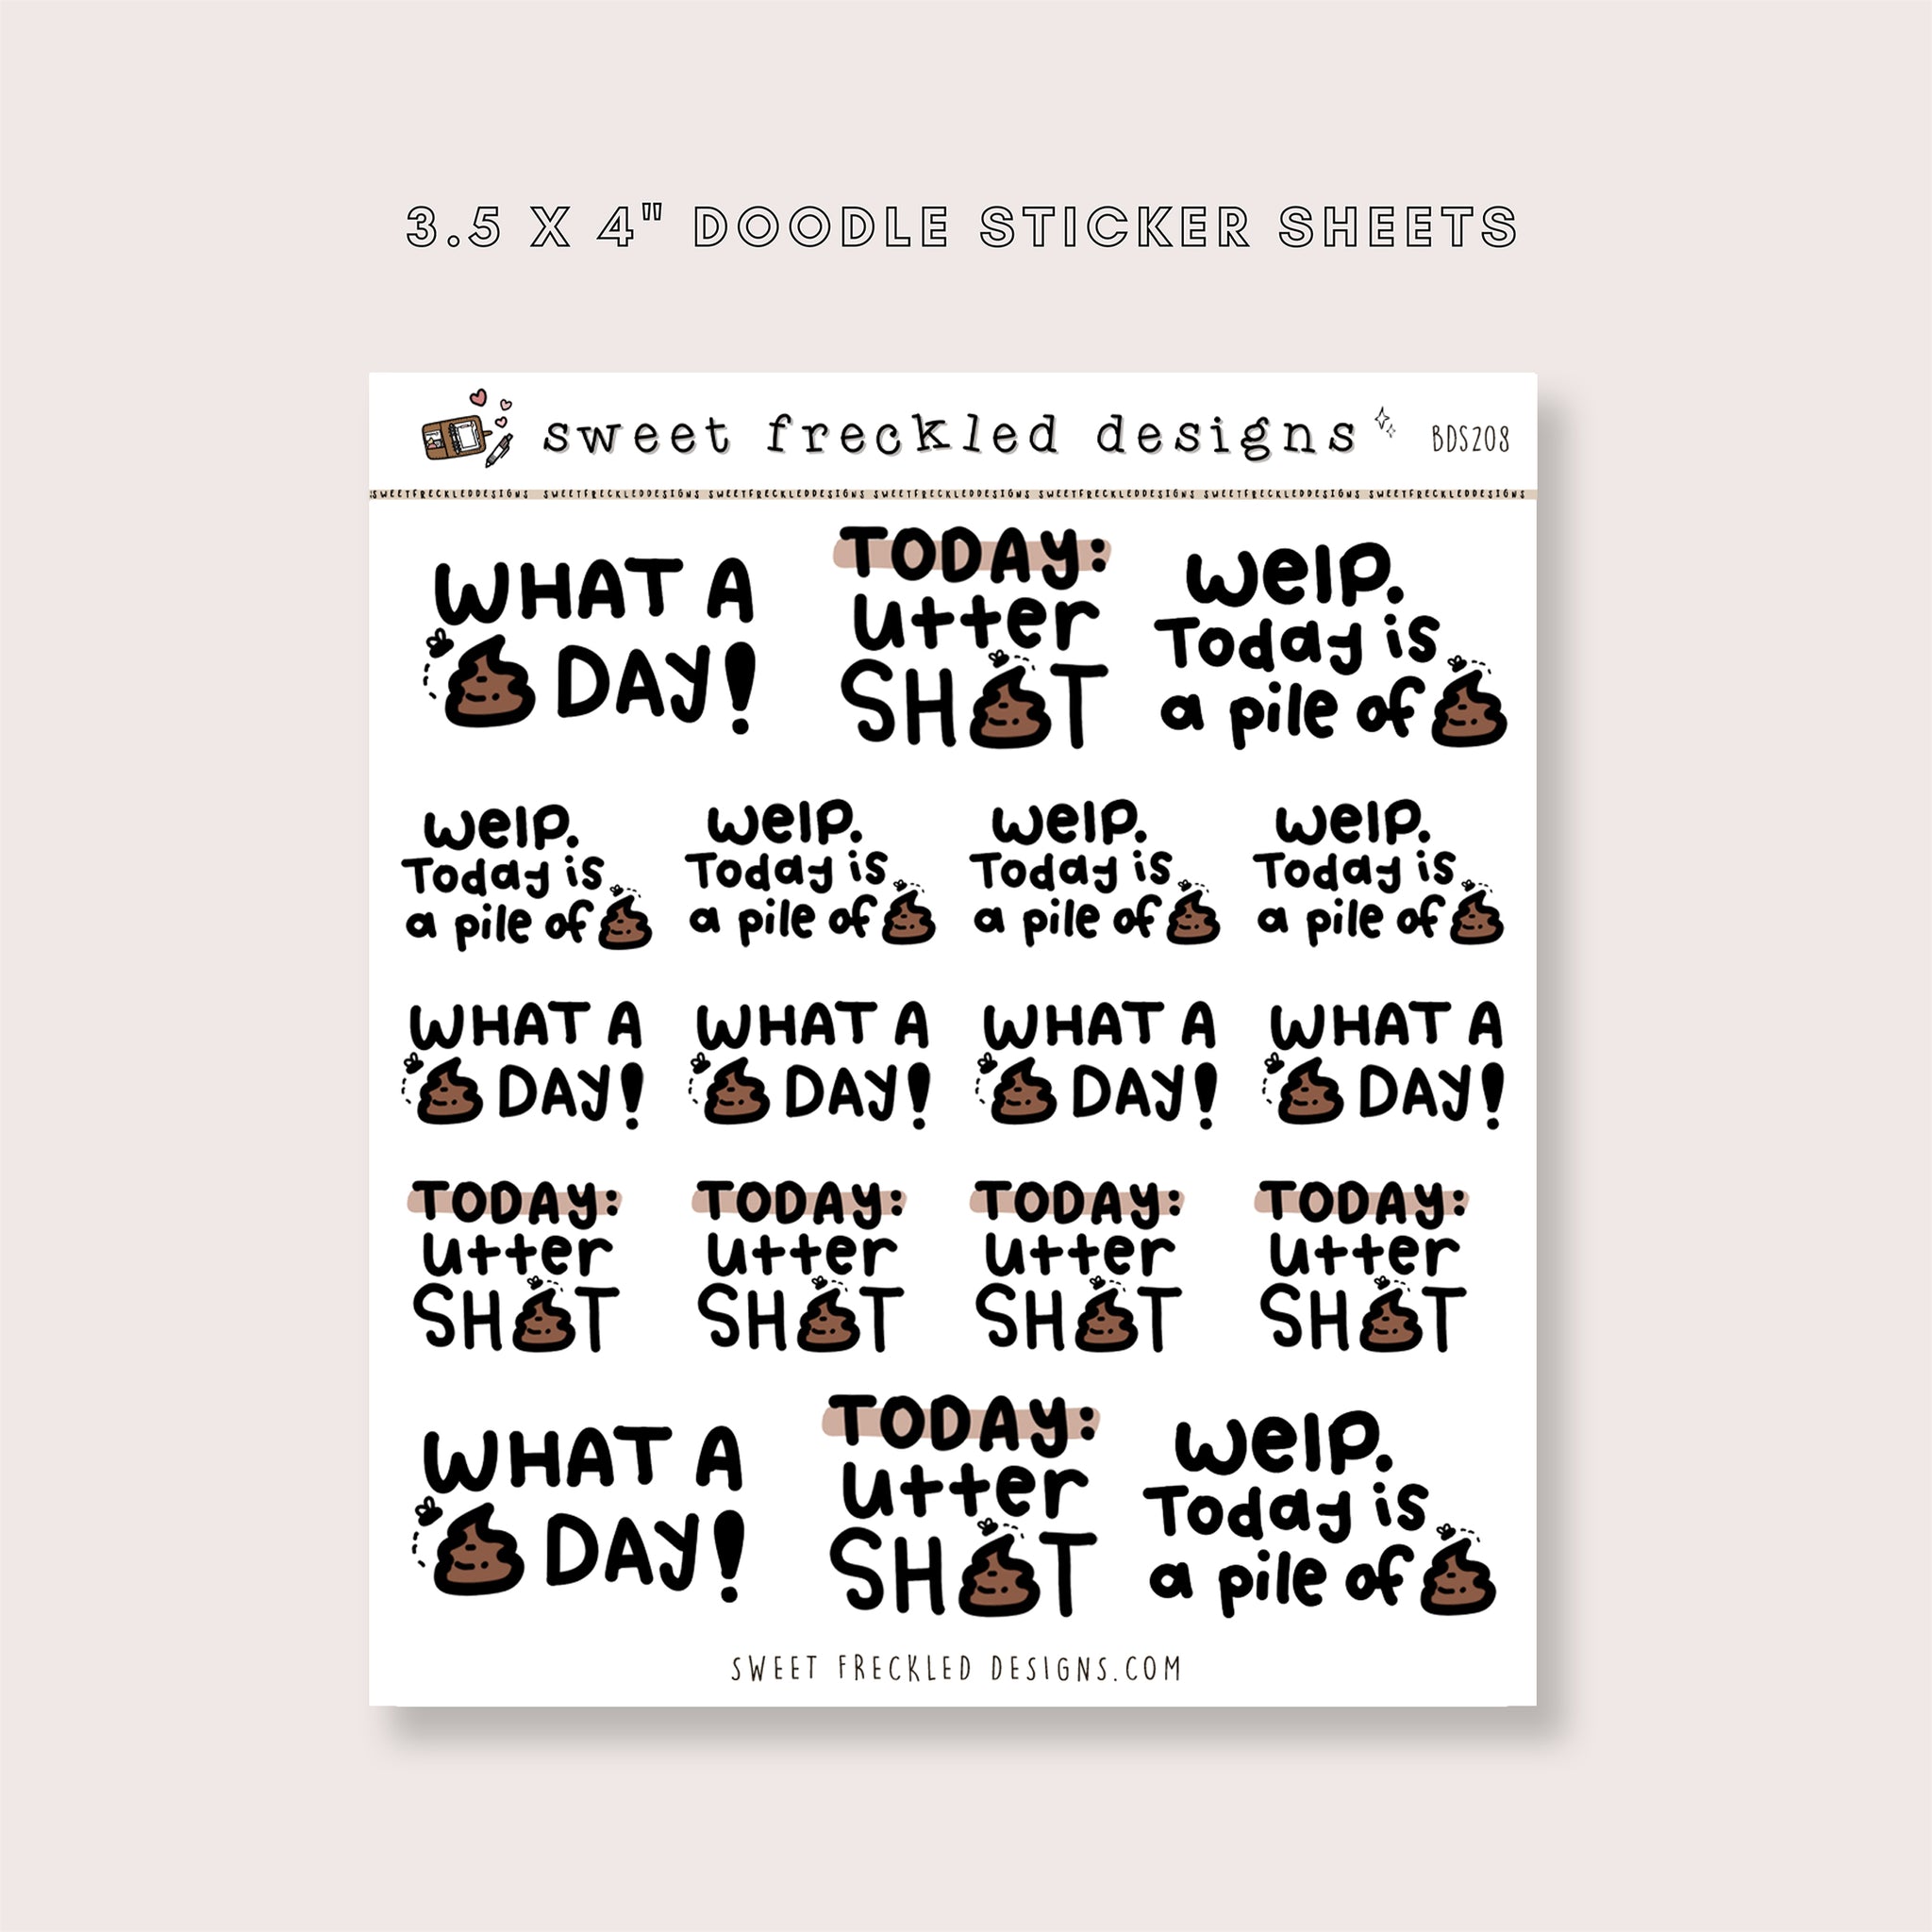 What a Sh!tty Day! Poop Stickers